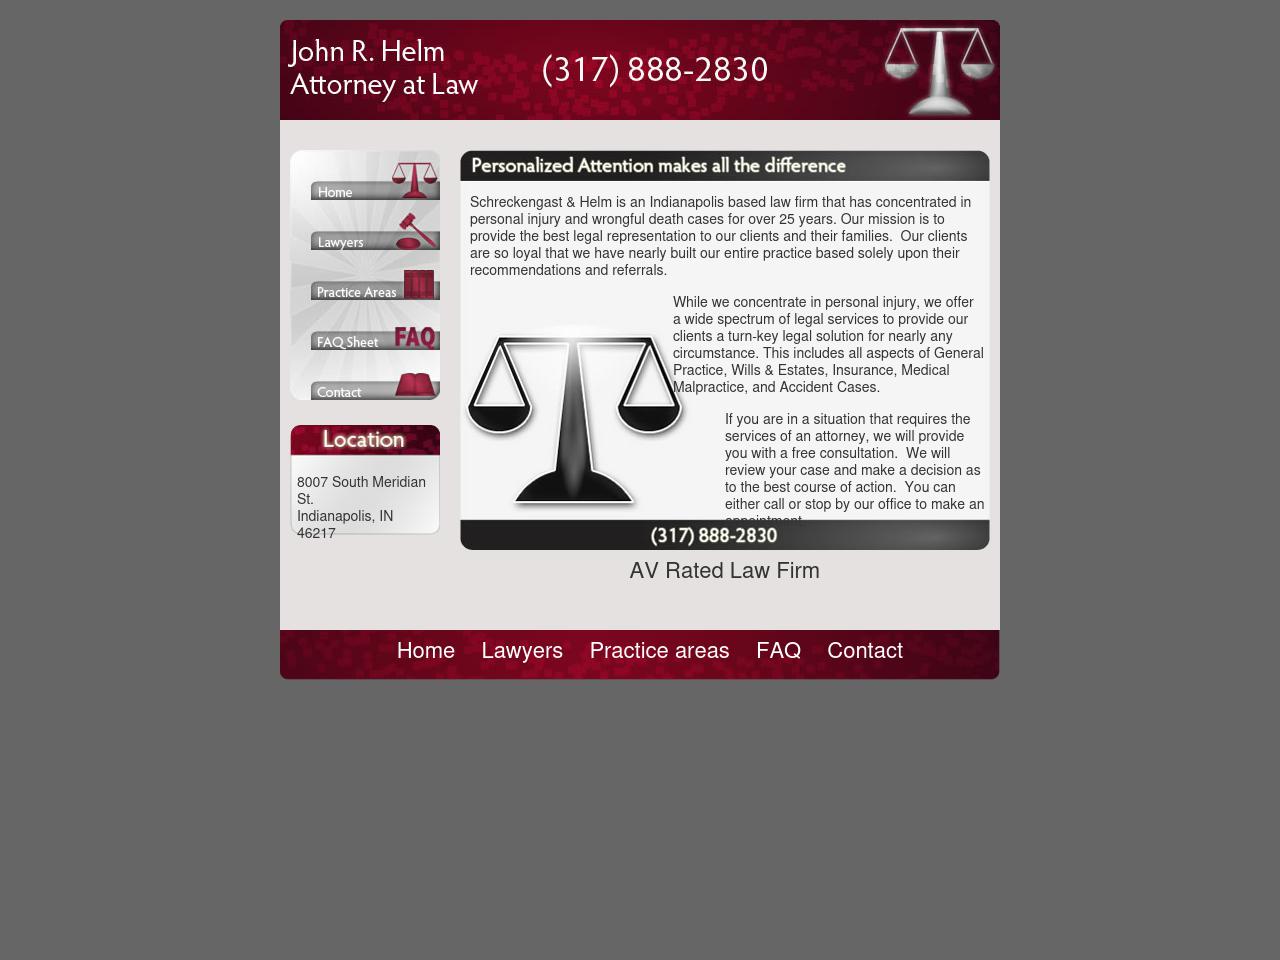 Schreckengast & Helm - Indianapolis IN Lawyers